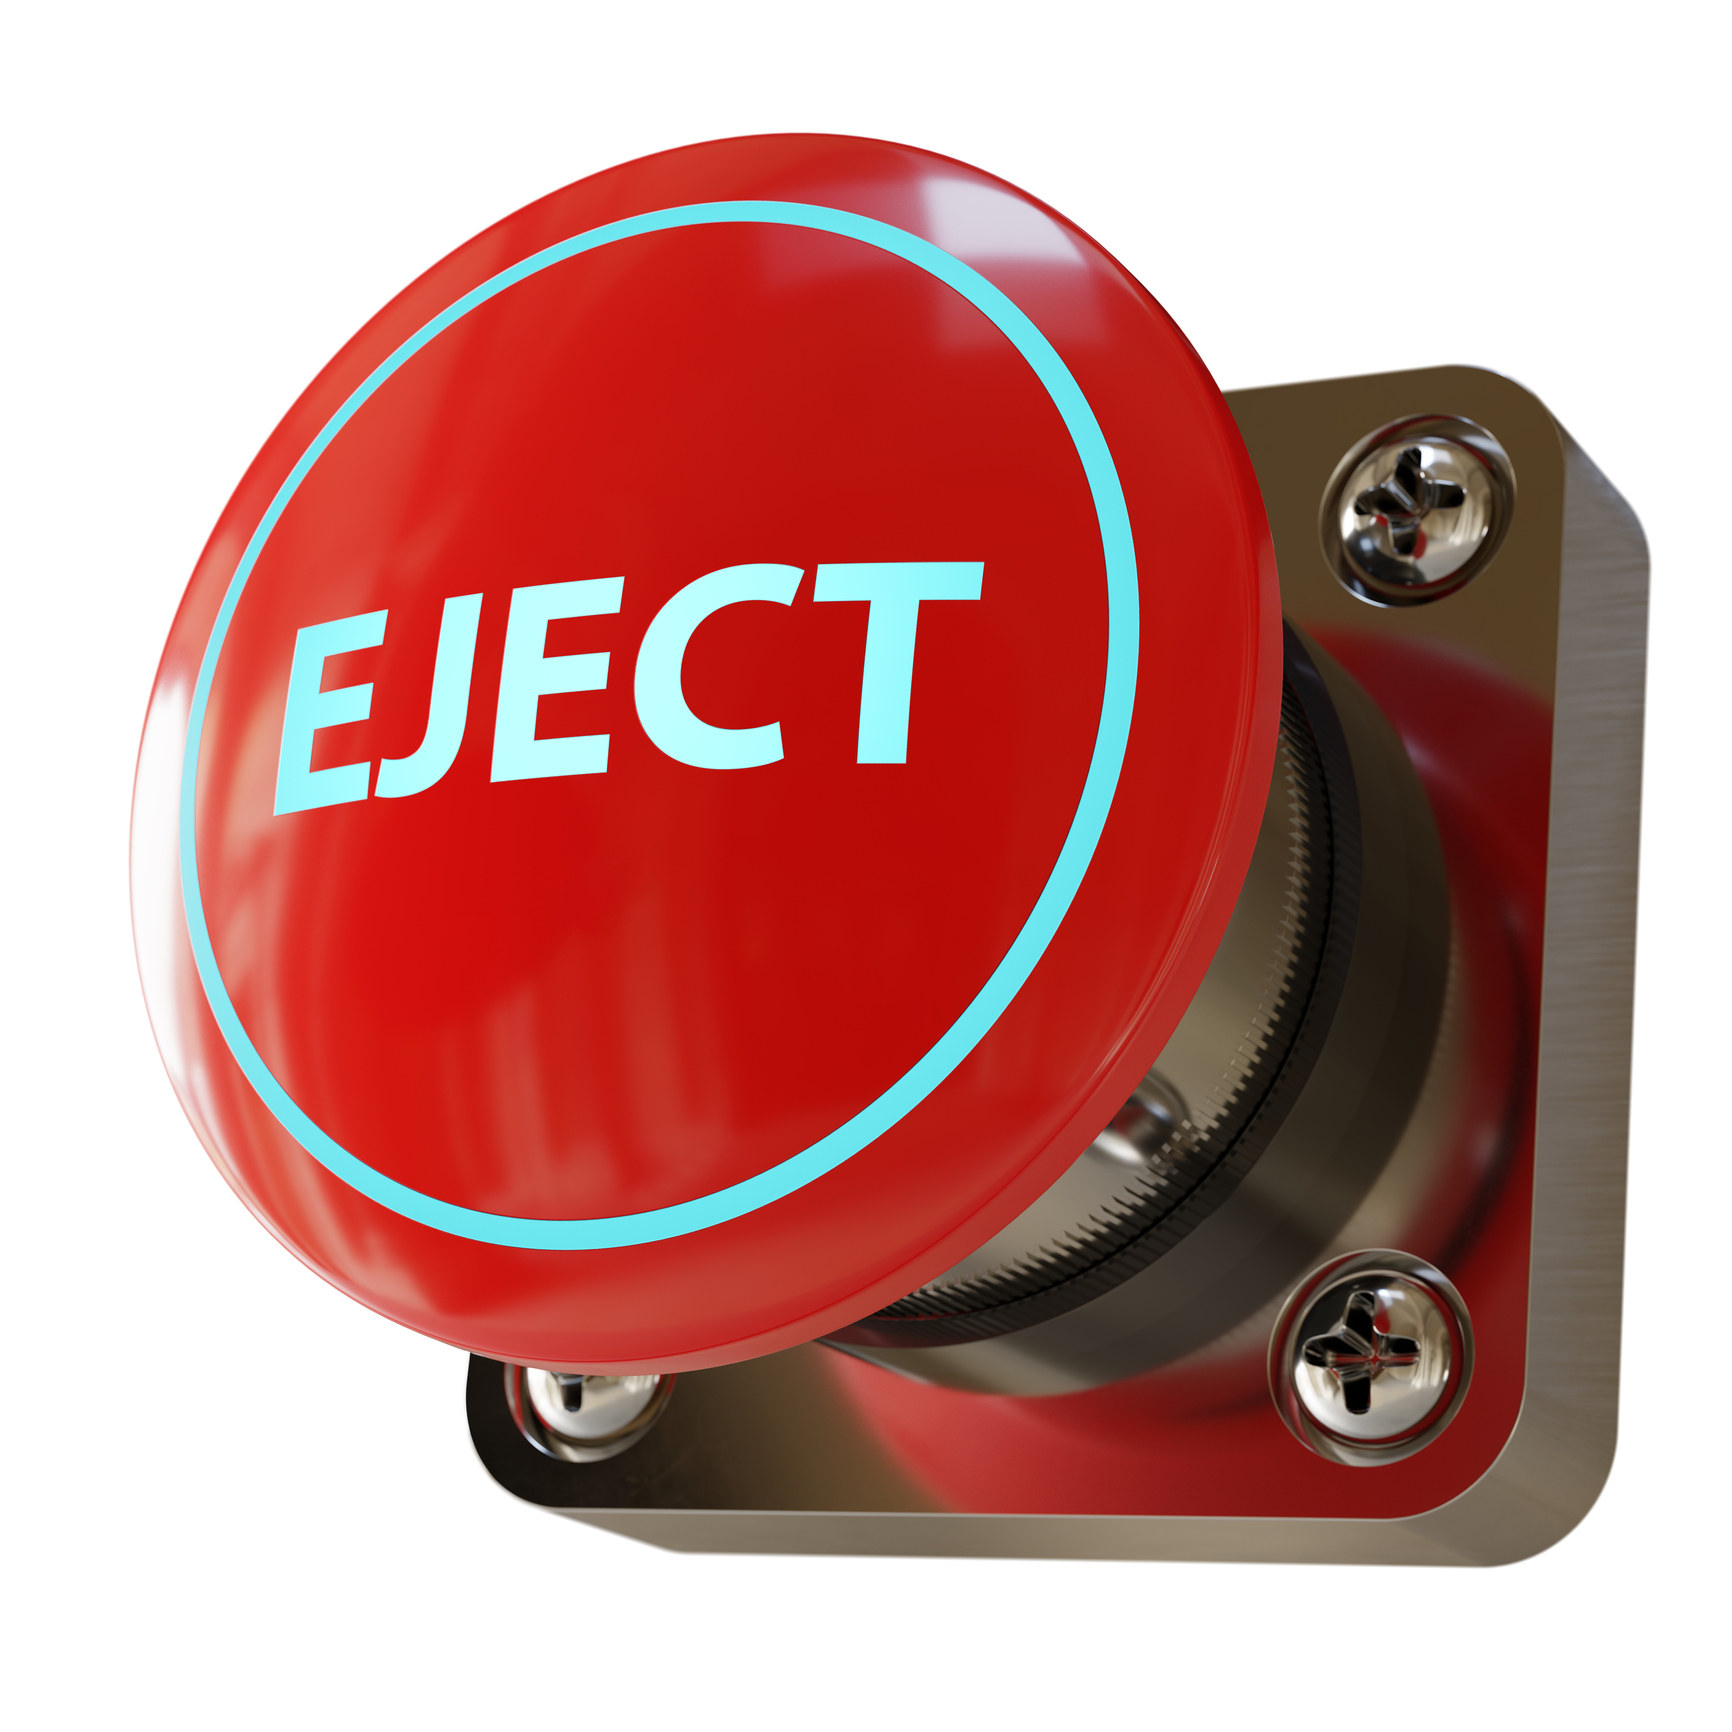 A red eject button